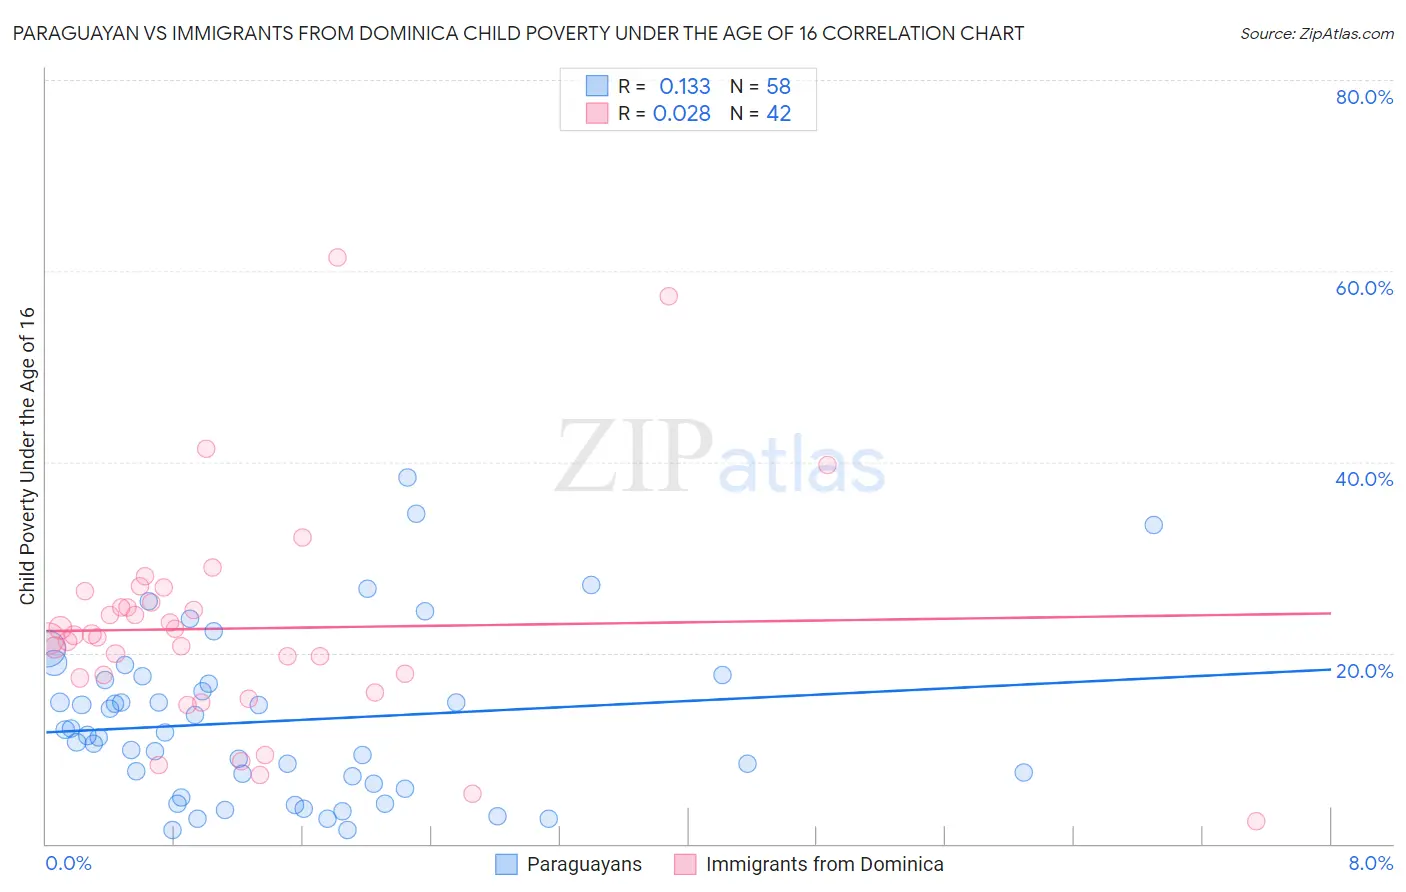 Paraguayan vs Immigrants from Dominica Child Poverty Under the Age of 16